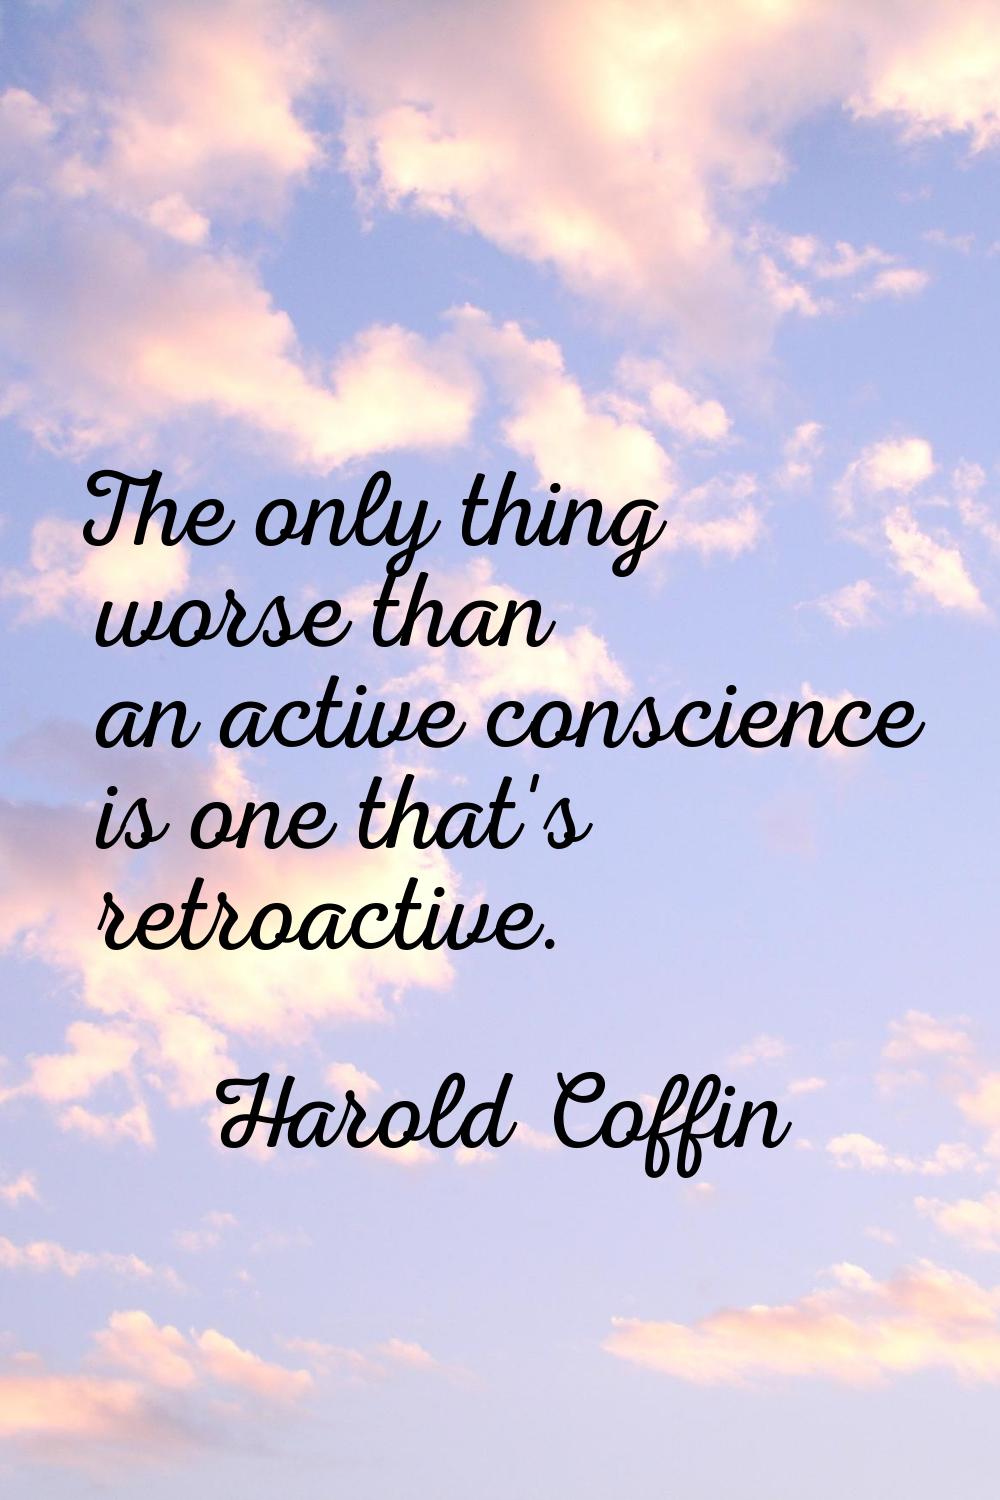 The only thing worse than an active conscience is one that's retroactive.